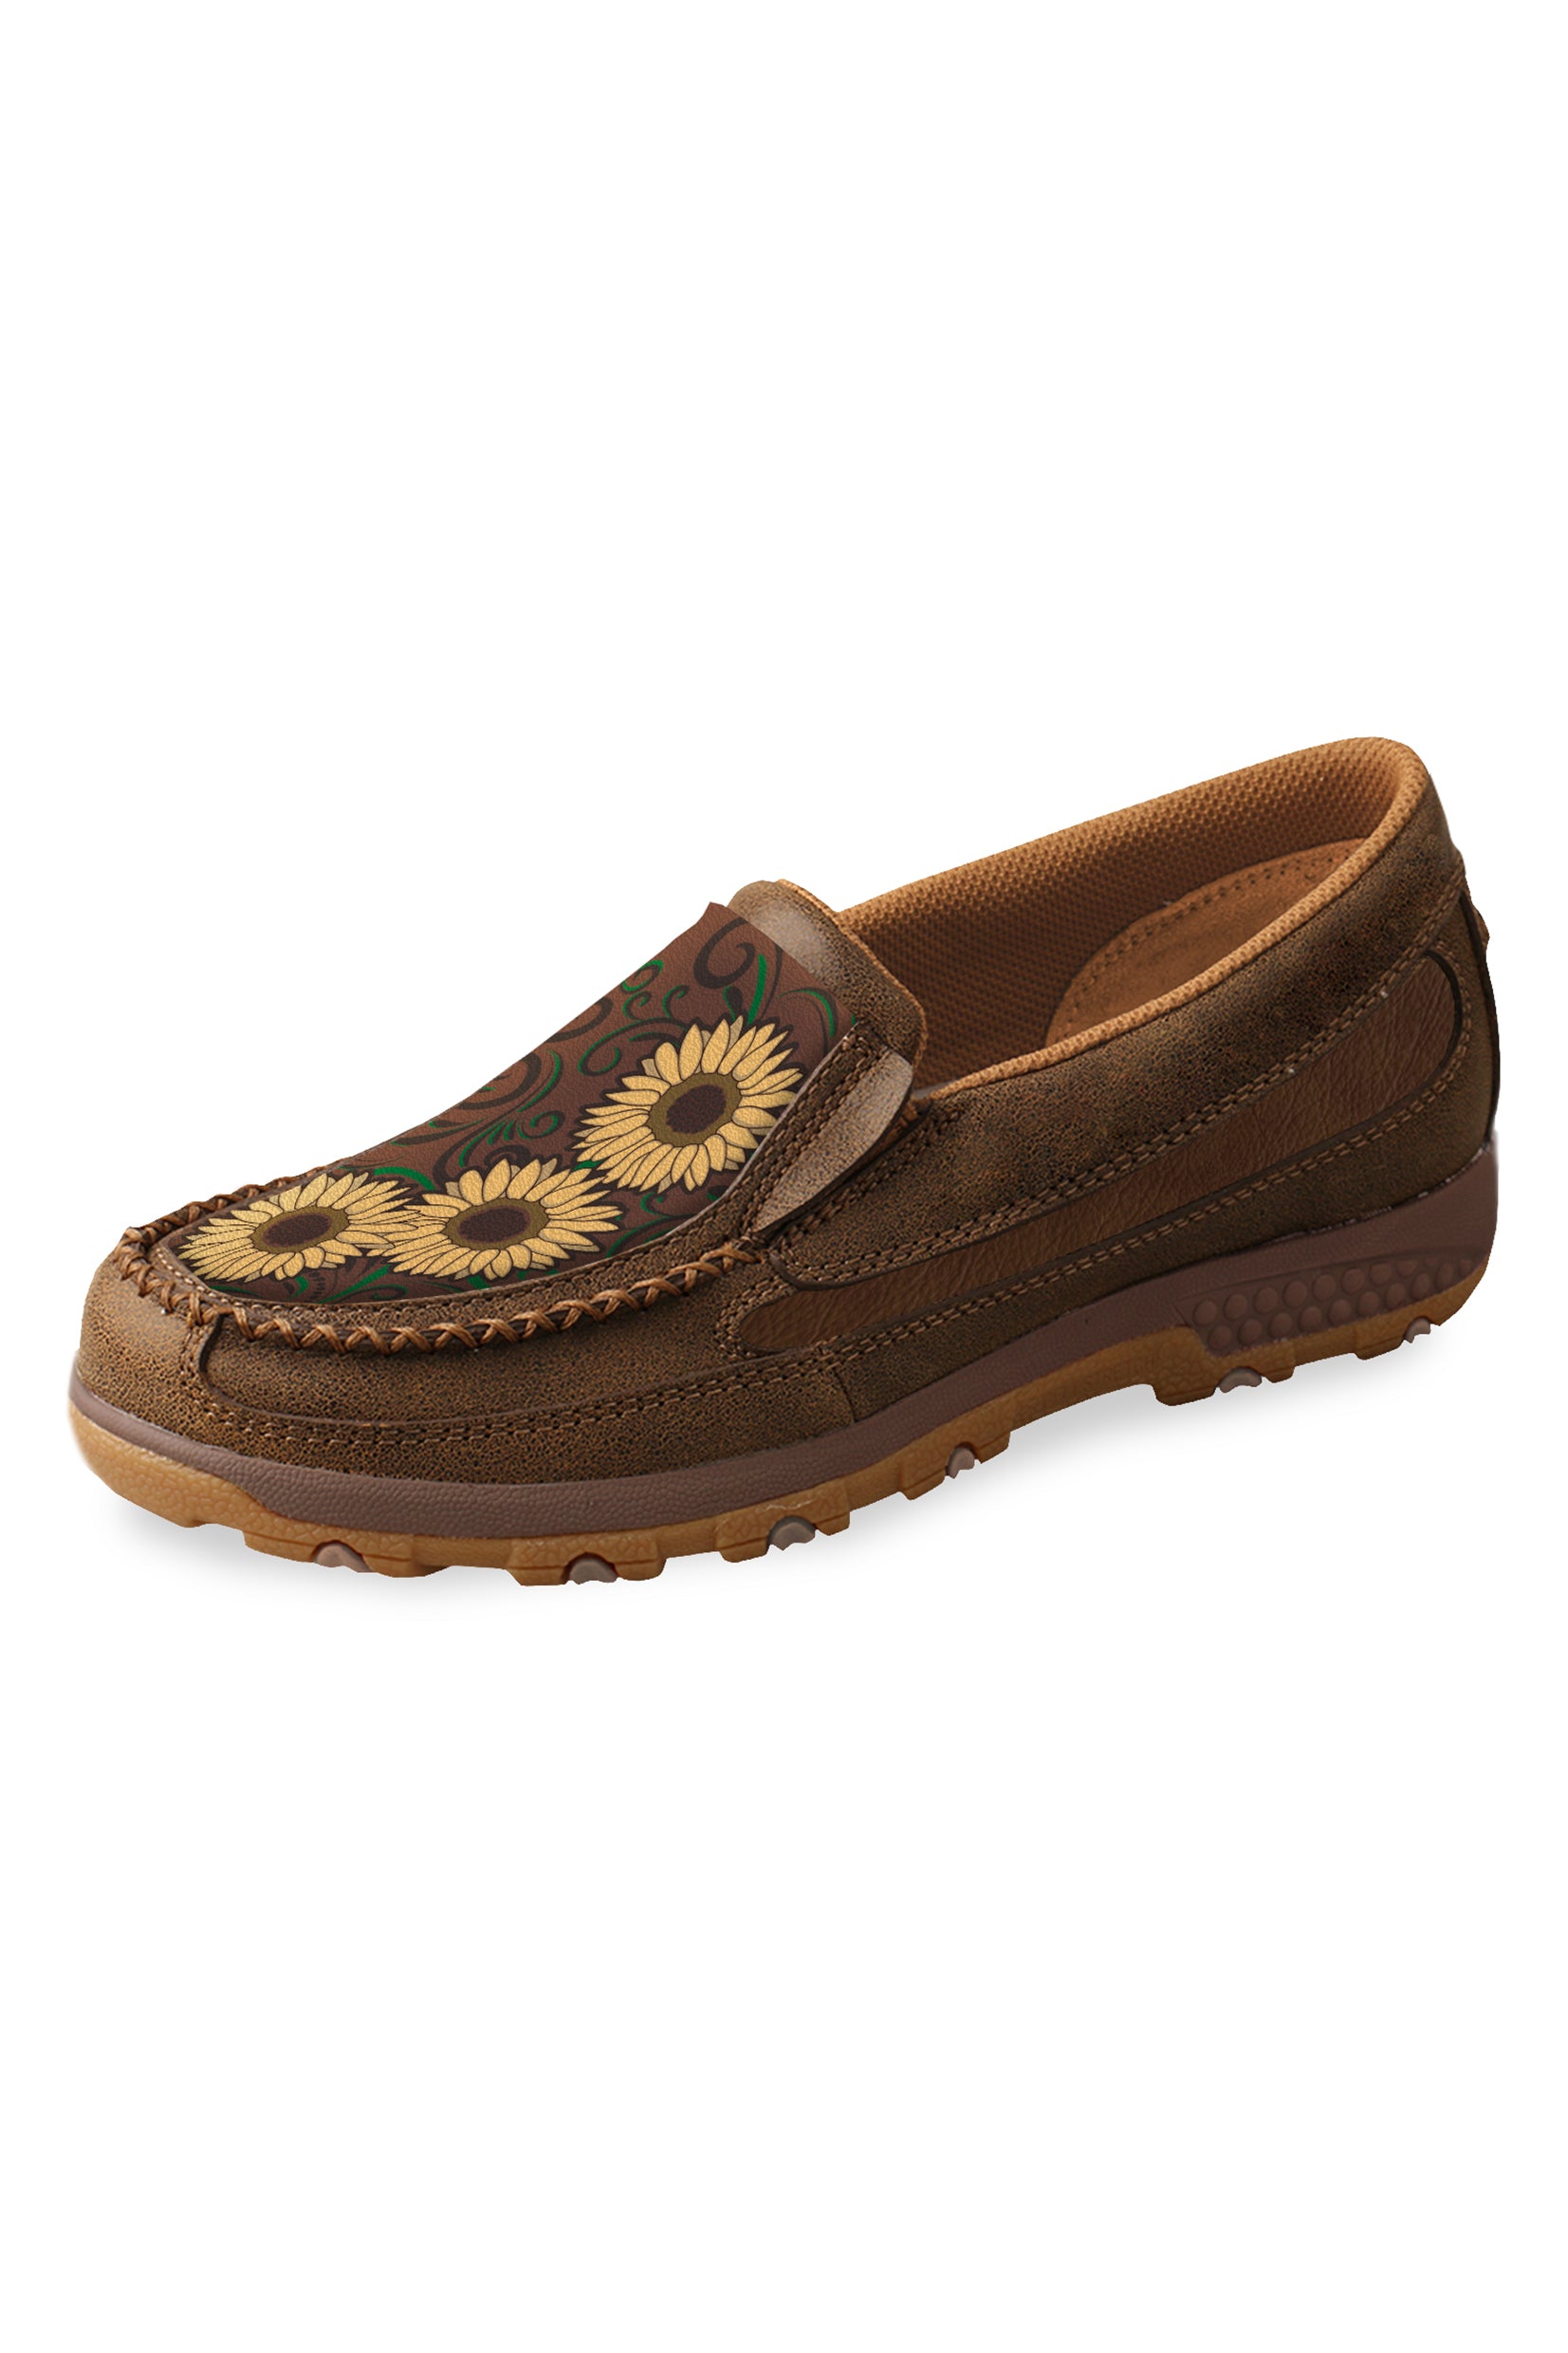 Twisted X Ladies Cellstretch Sunflower Mocs Slip On - New Year Clearance